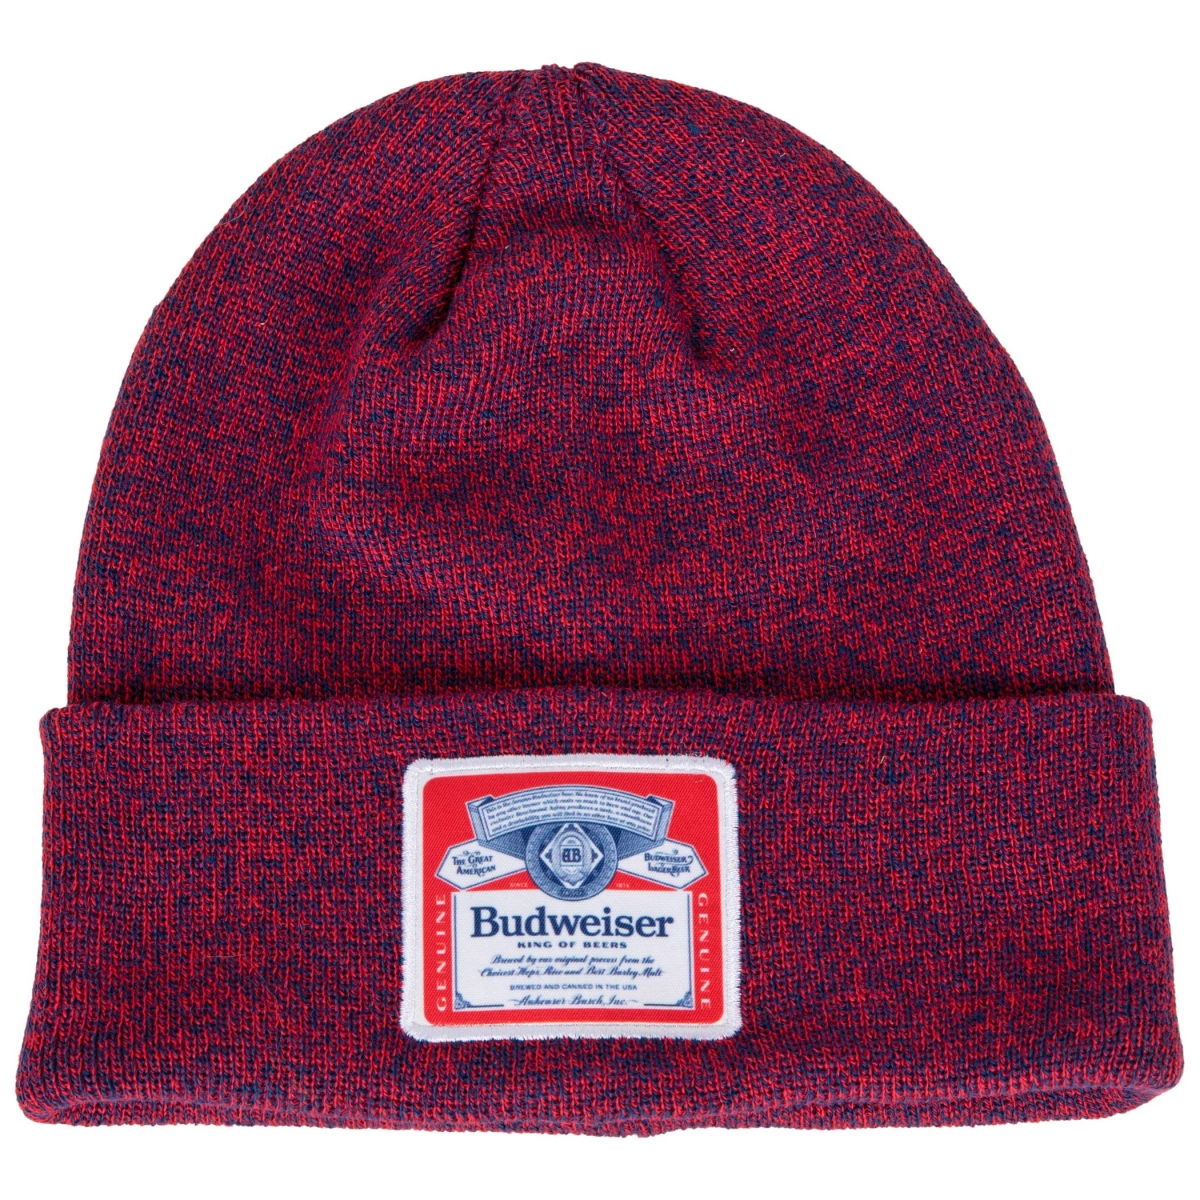 Picture of Budweiser 831178 Label Patch Red Knit Cuff Beanie